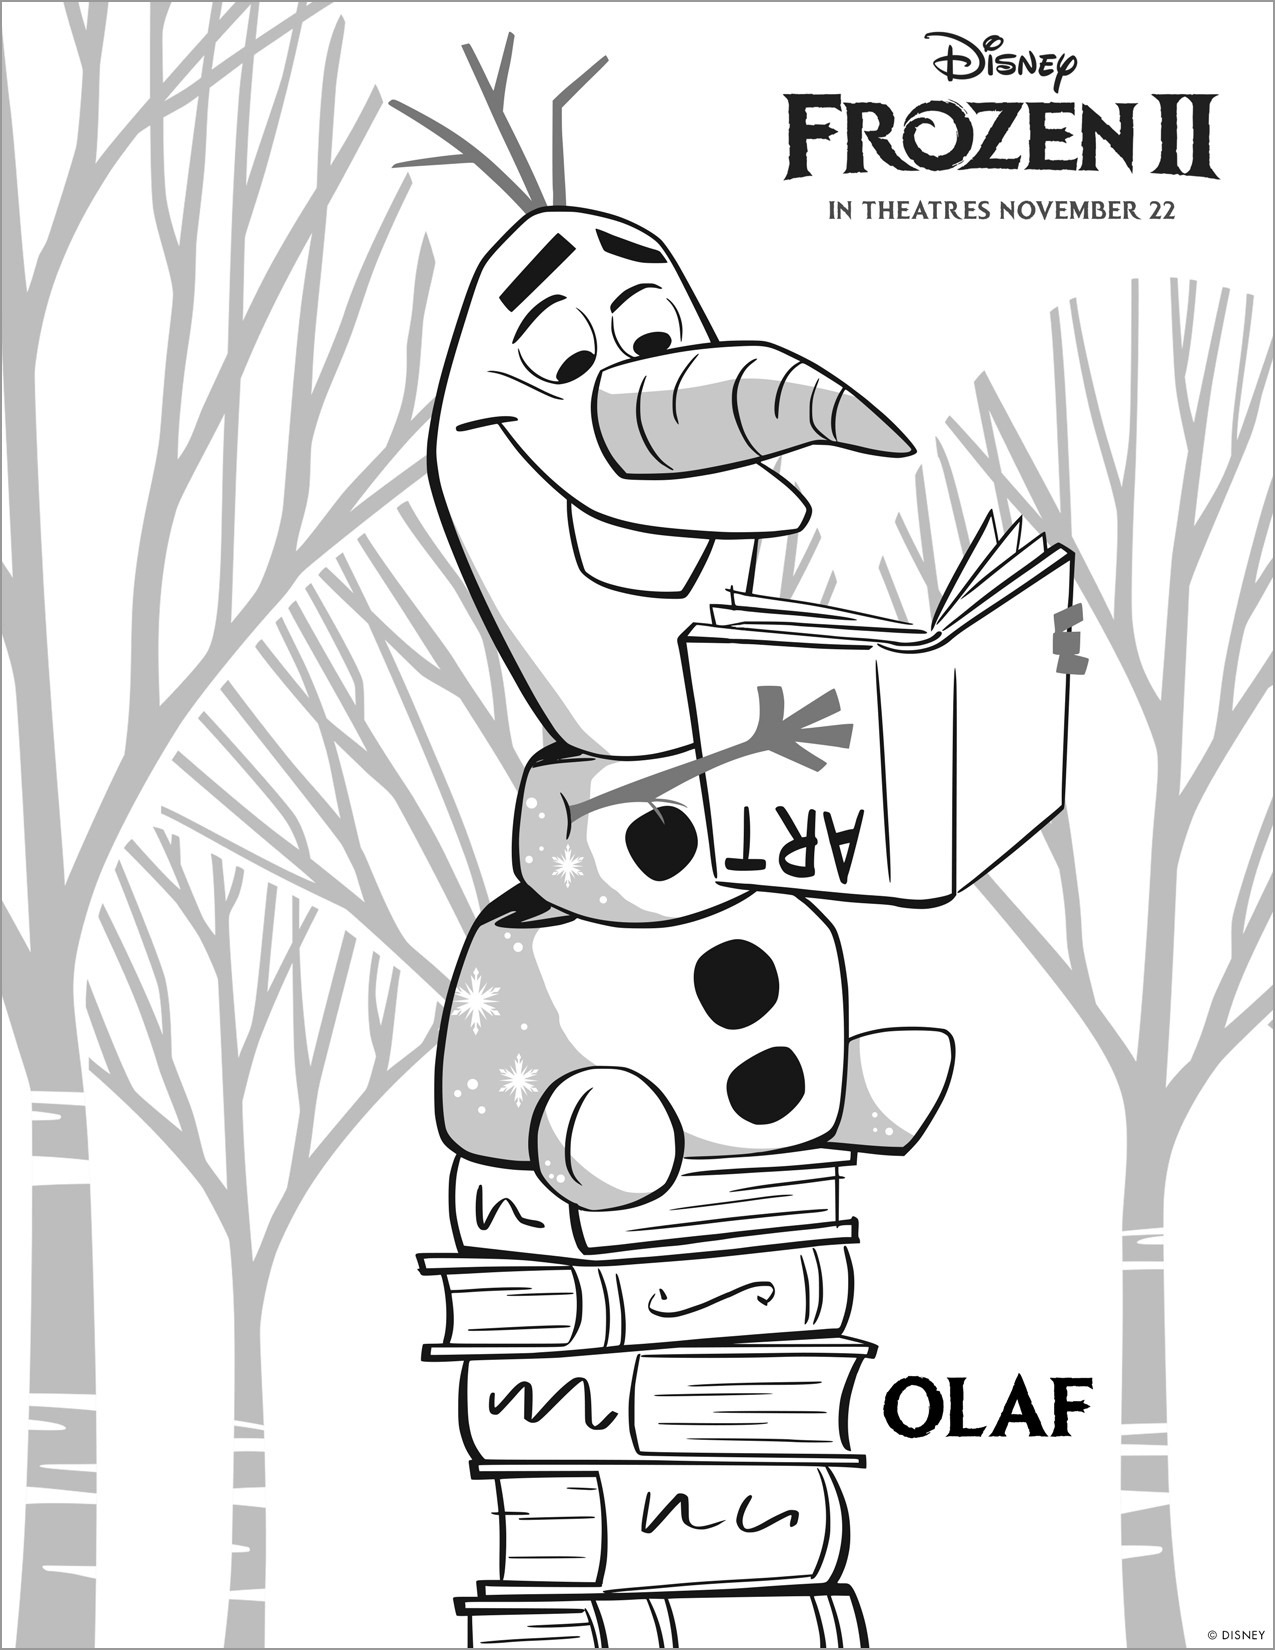 Olaf Frozen Ii Coloring Page to Print